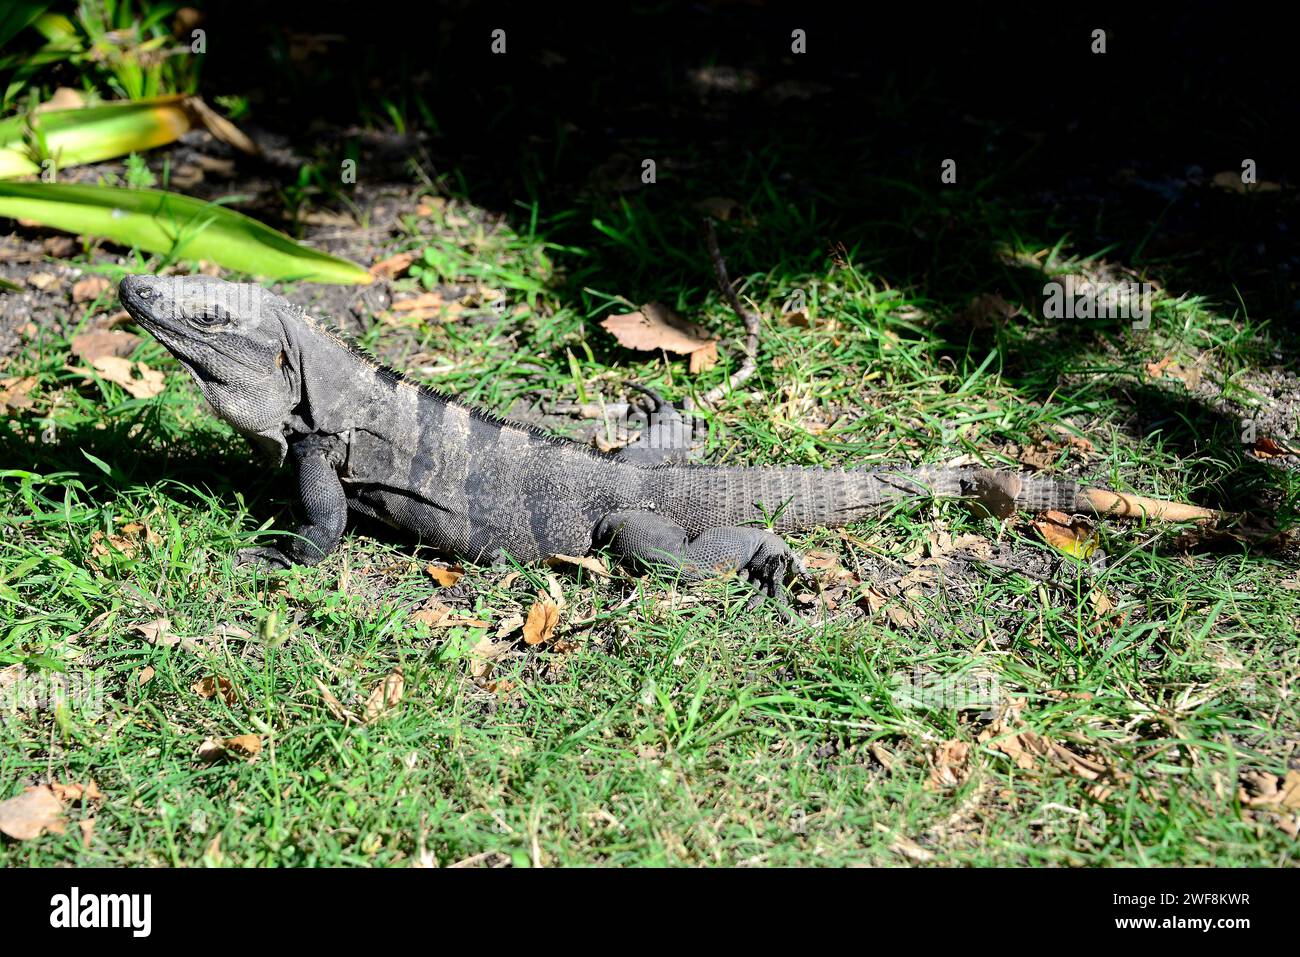 Black iguana or black spiny-tailed iguana (Ctenosaura similis) is an iguana native to Mexico and Central America. This photo was taken in Tulum, Mexic Stock Photo